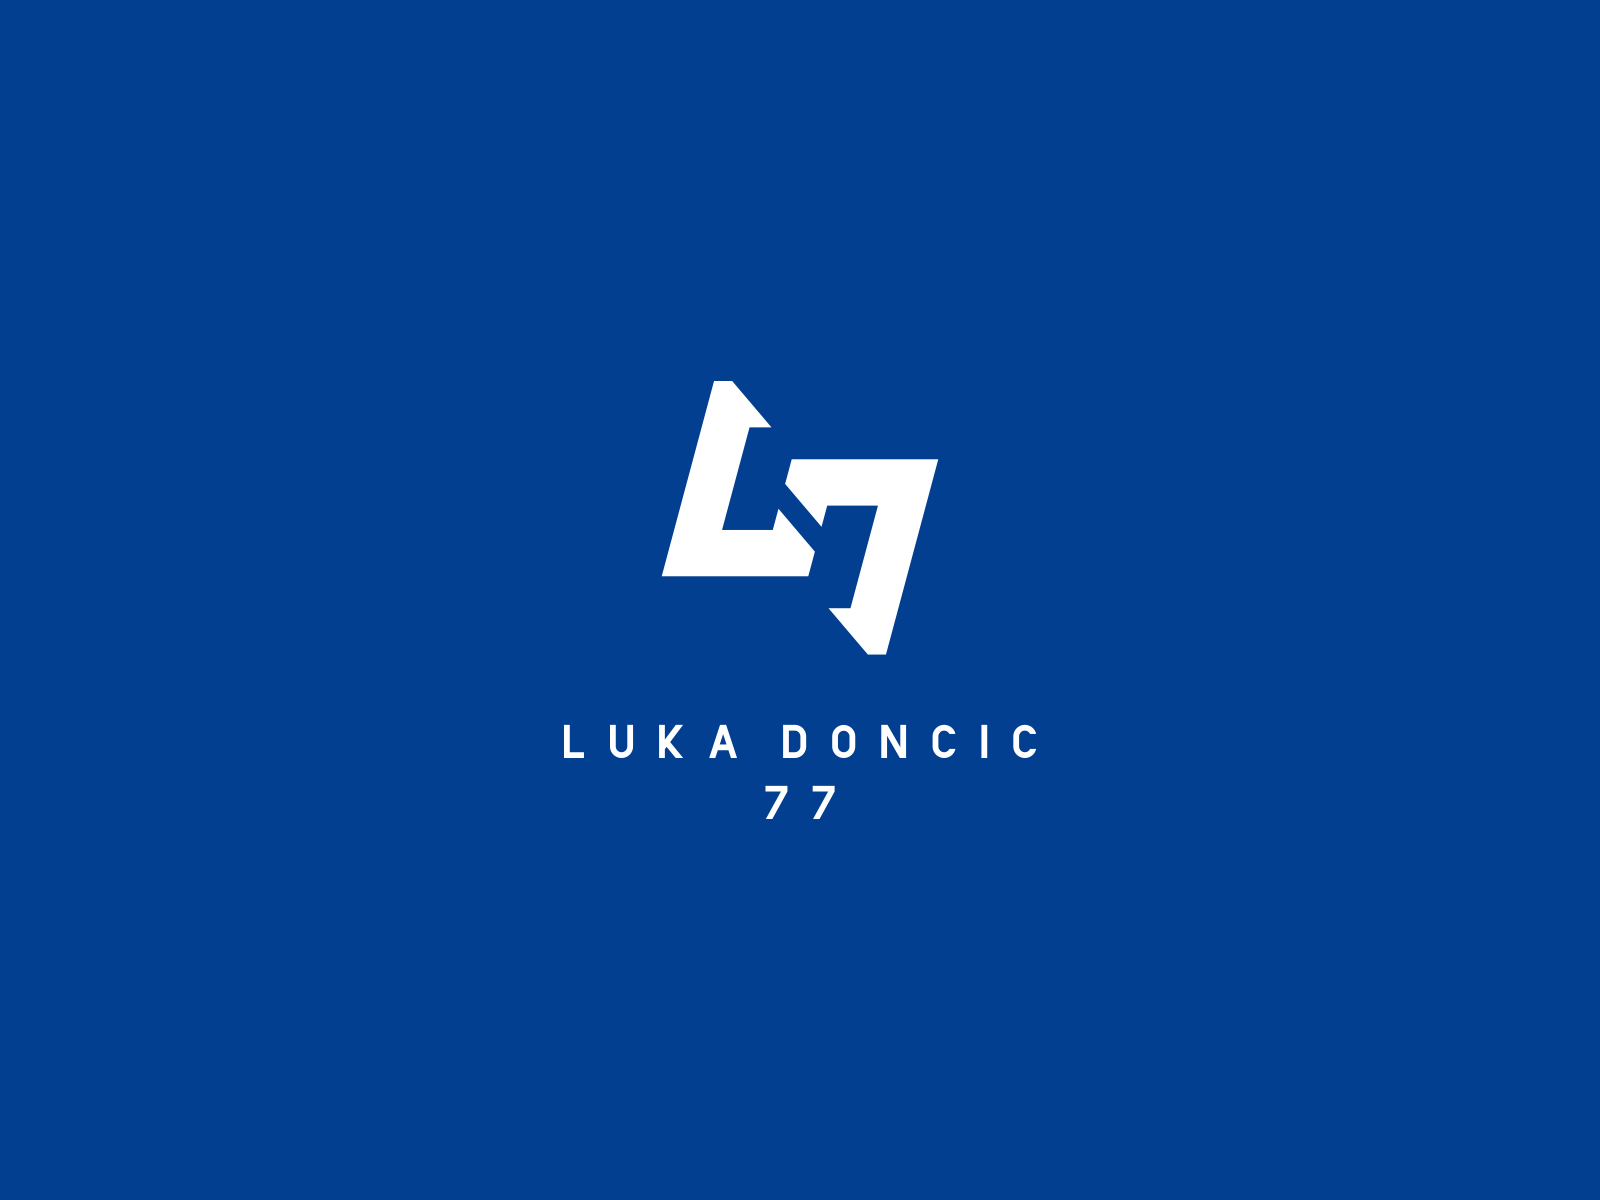 Luka Doncic 77 Logo by Anthony Gribben on Dribbble